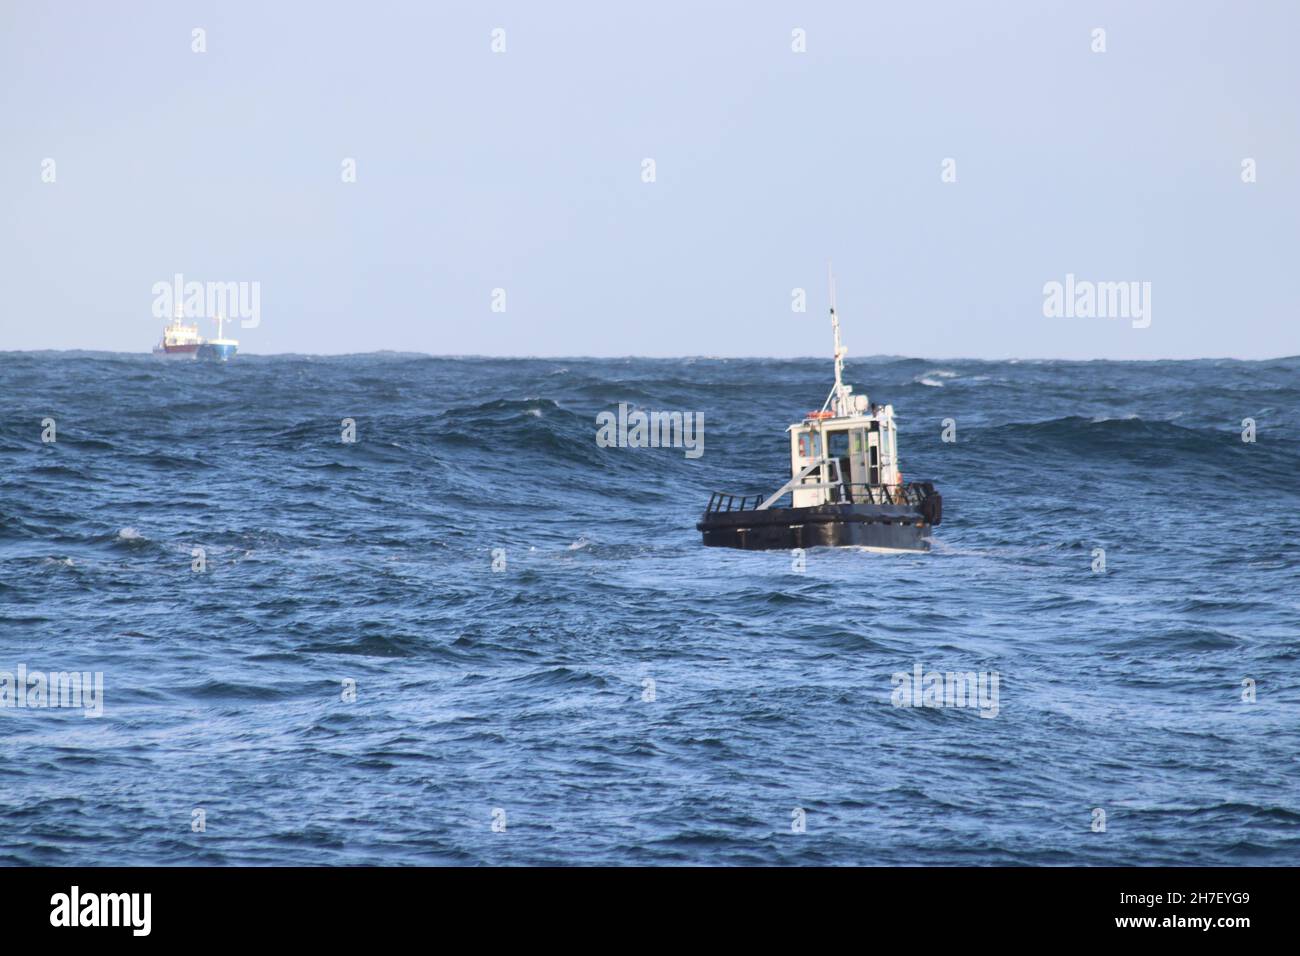 Pilot boat going out to lead ship into harbour Stock Photo